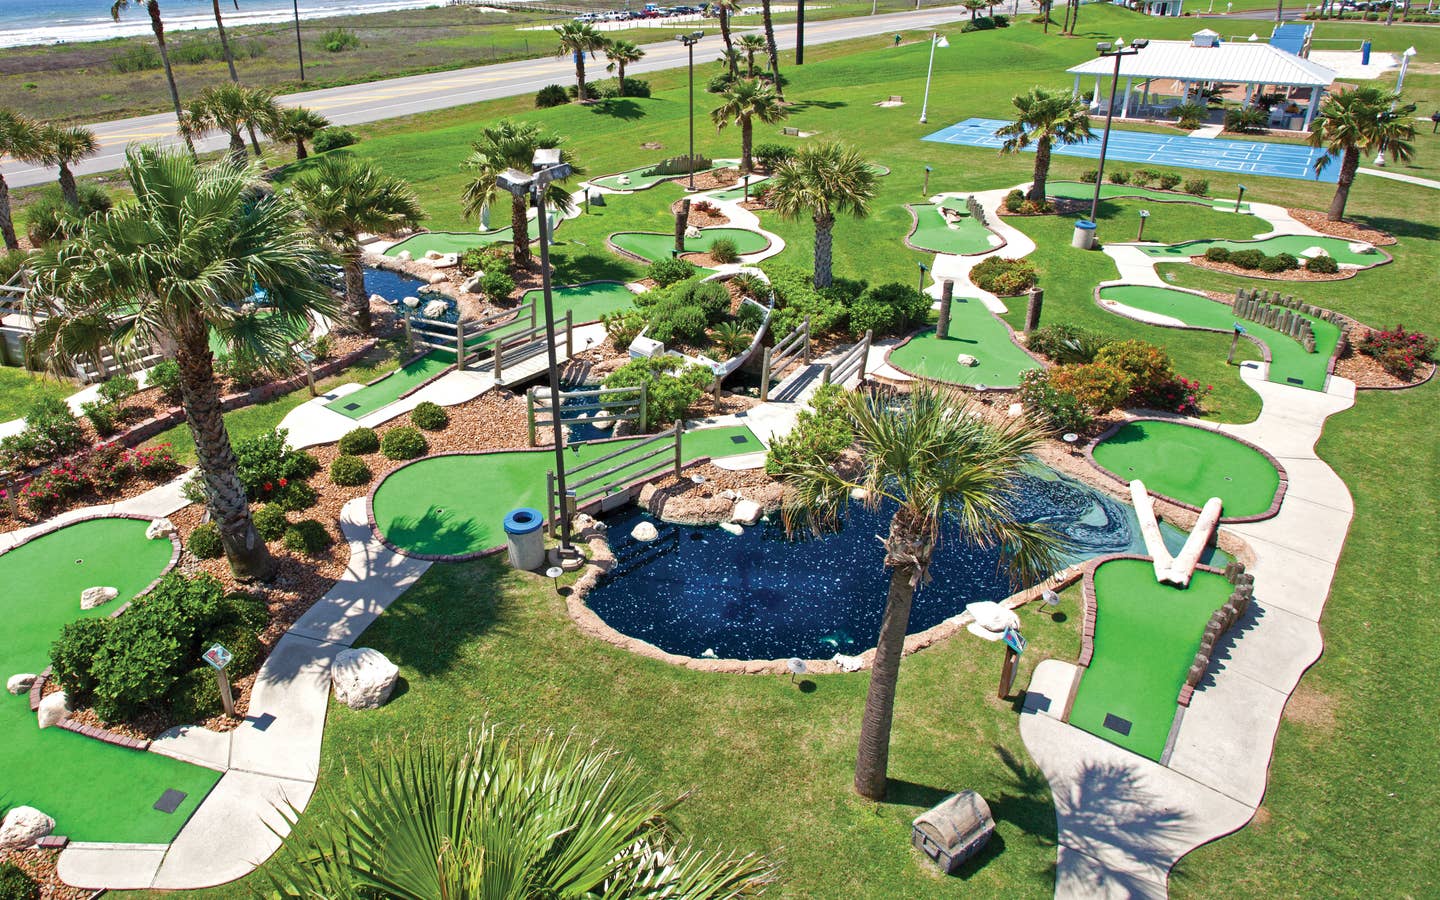 Aerial view of outdoor mini golf course at Galveston Seaside Resort.